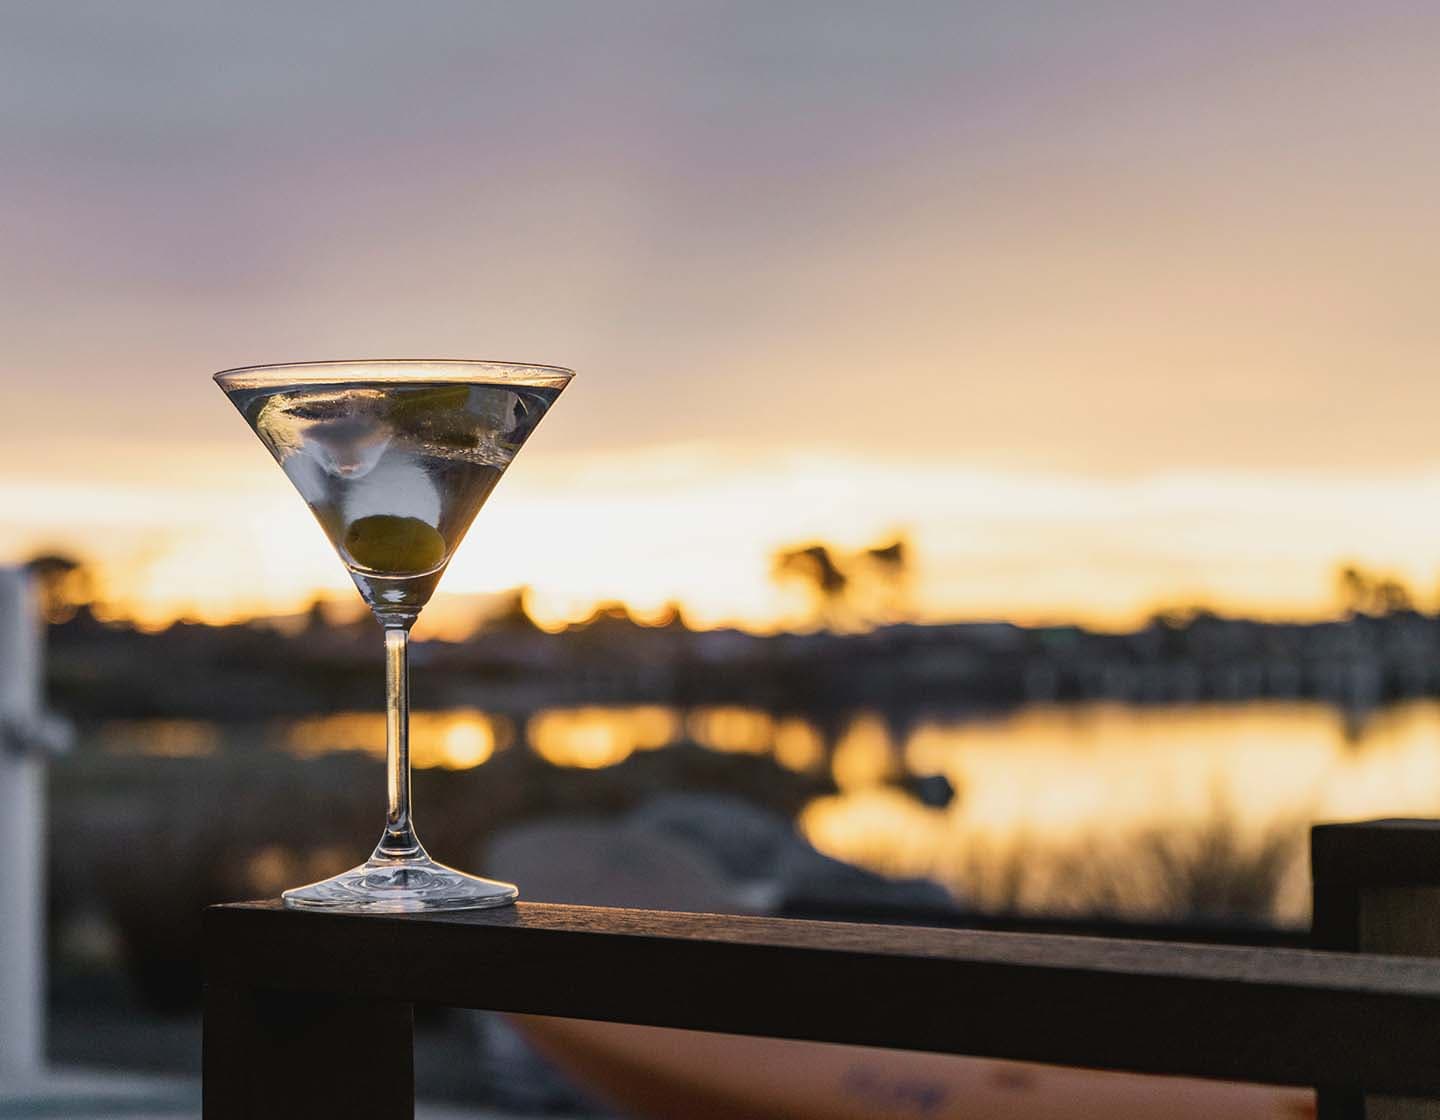 A Dirty Martini, with olives in the glass against a sunset background. 